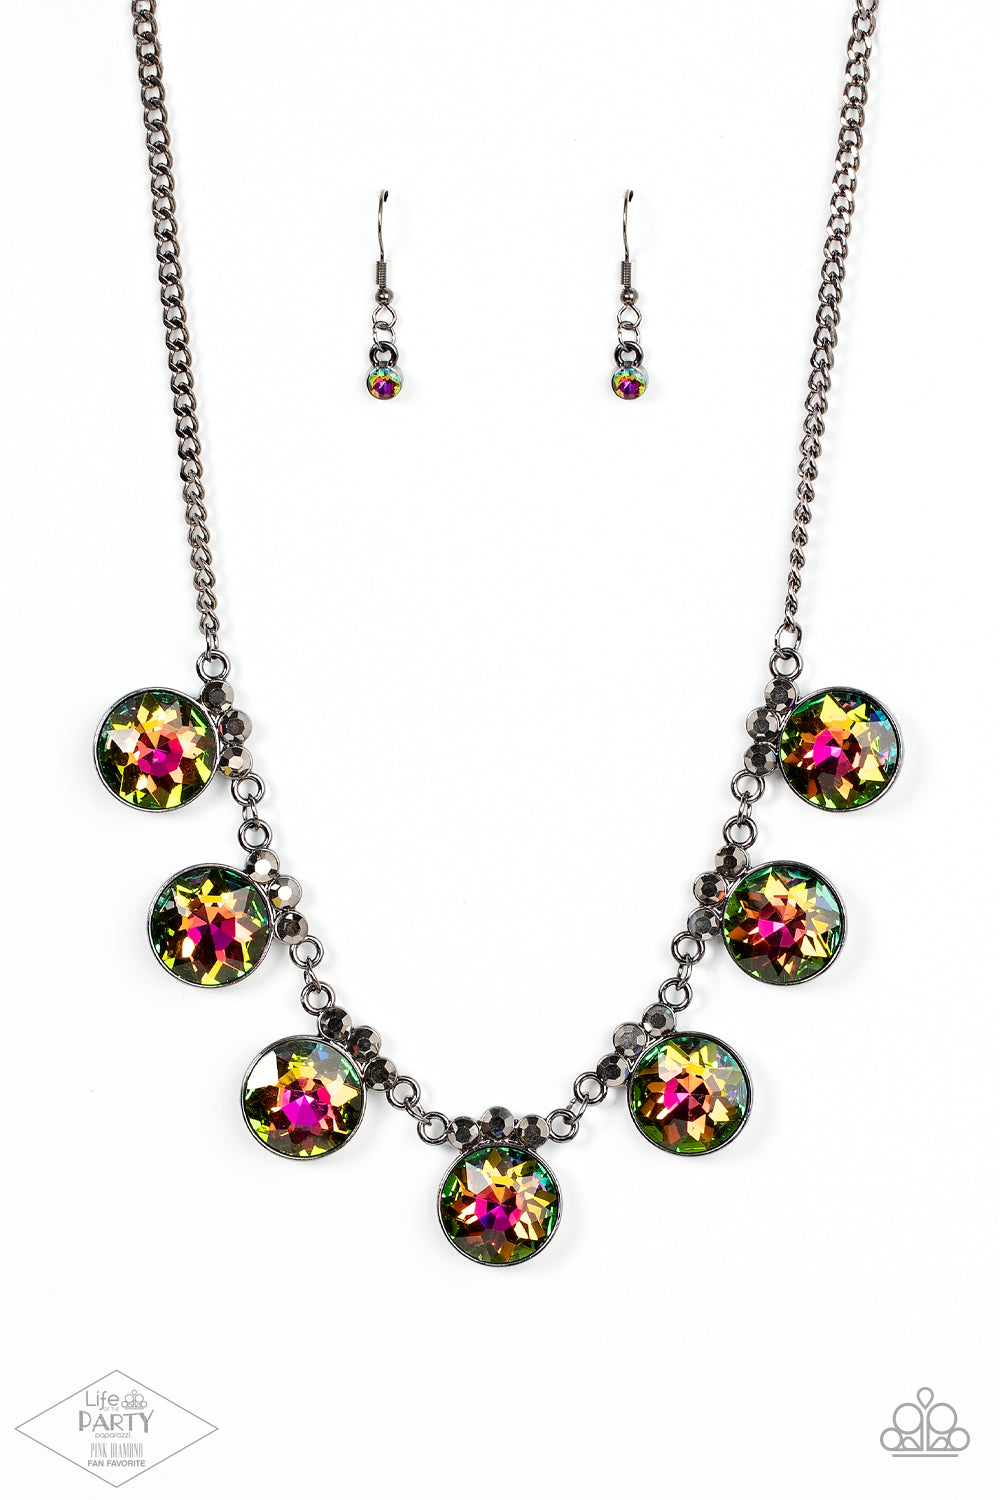 Paparazzi GLOW-Getter Glamour Multi Necklace Paparazzi Accessories. Oil Spill Jewelry. Dainty